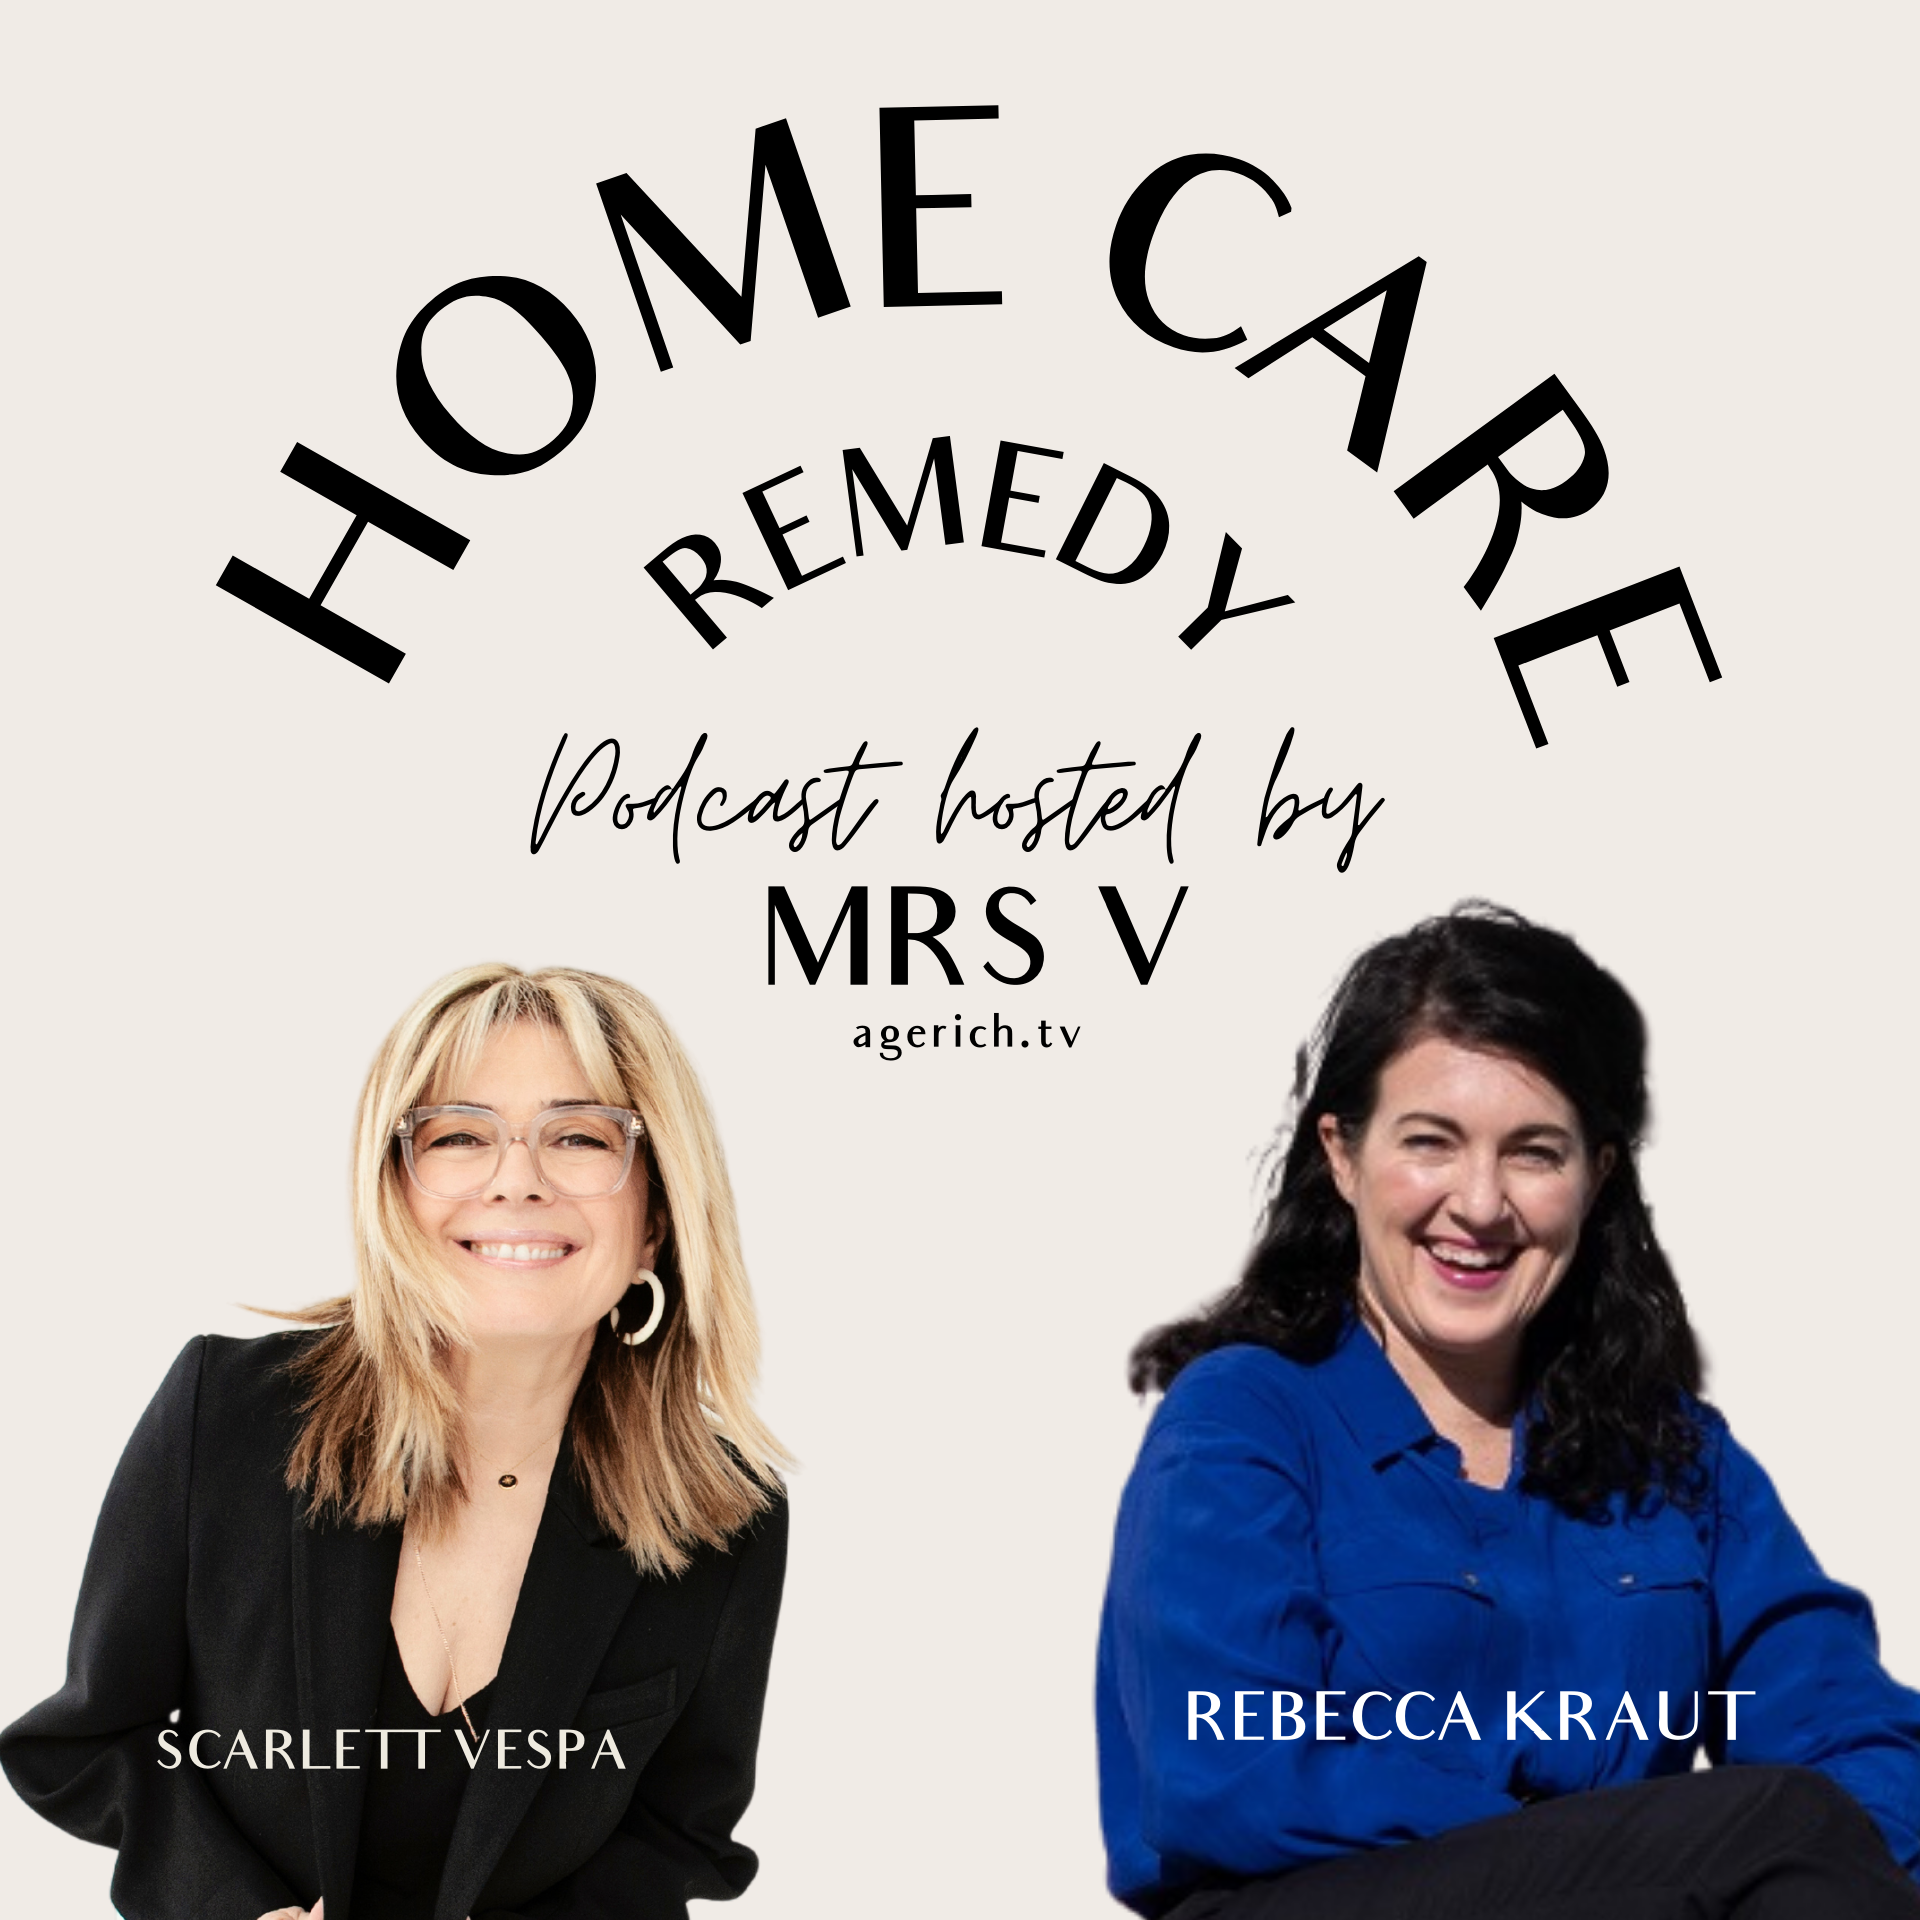 Home Care Remedy with Rebecca Kraut